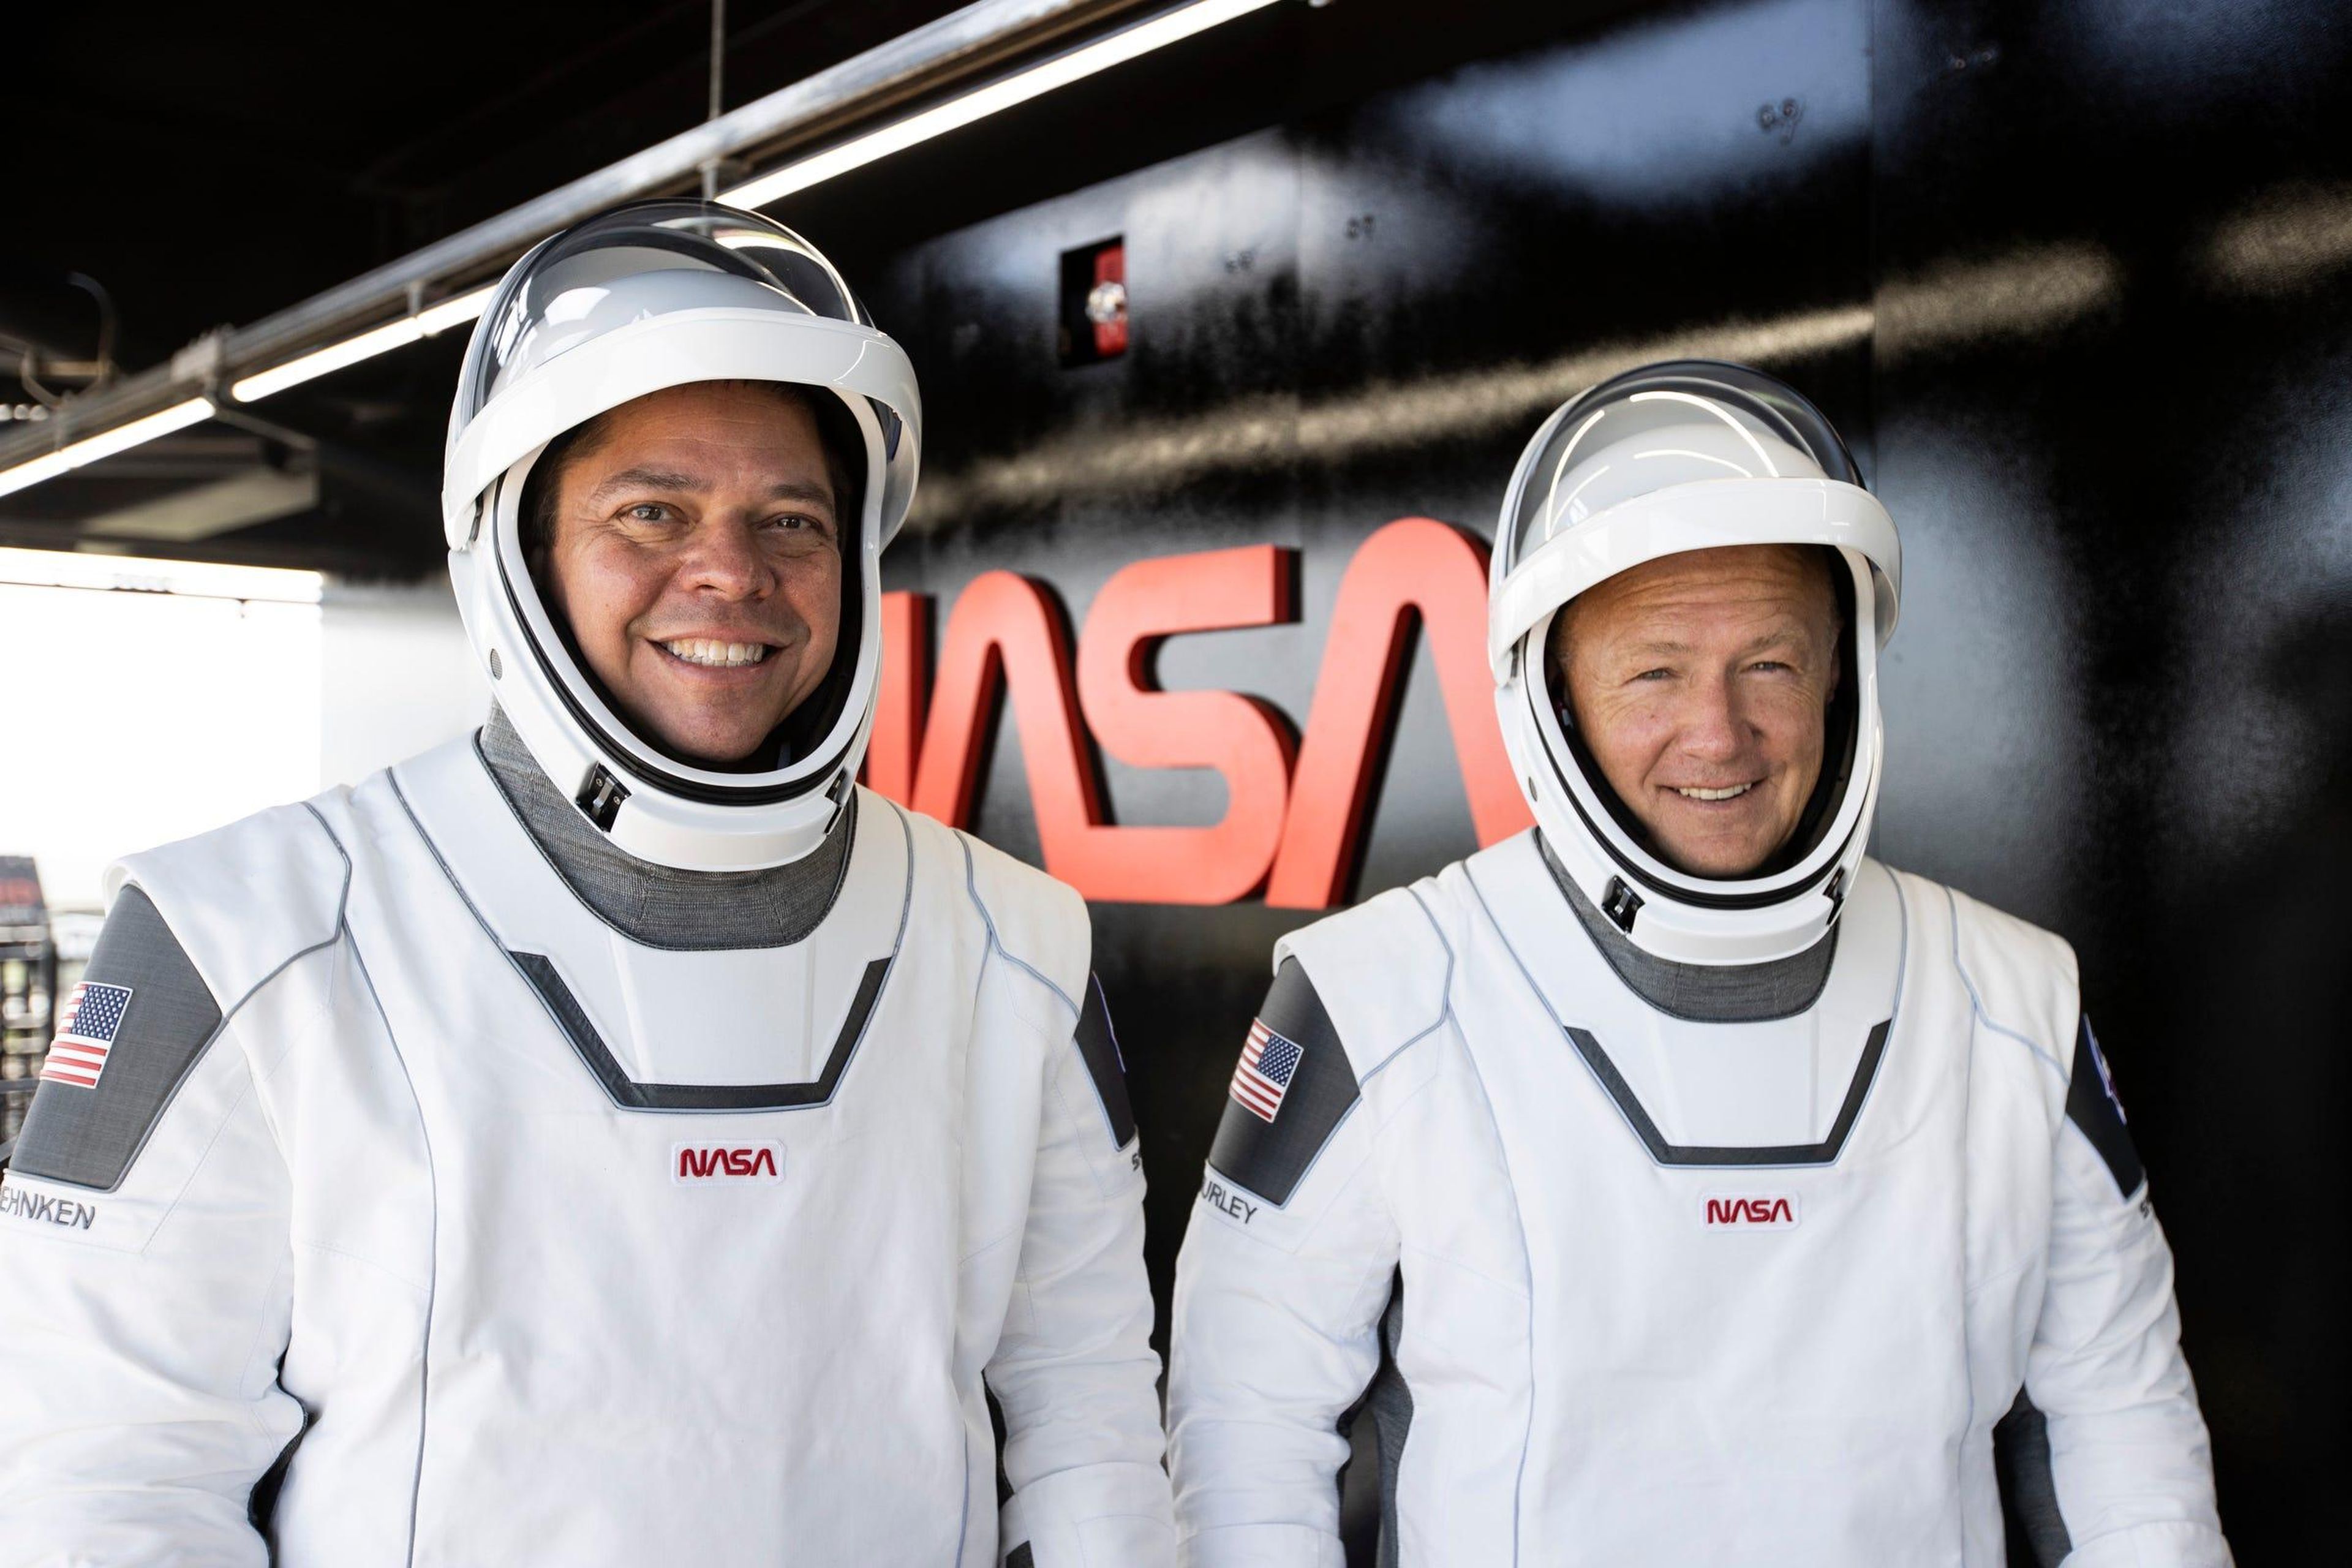 NASA astronauts Bob Behnken (left) and Doug Hurley wear their spacesuits during a dress rehearsal on May 23, 2020, ahead of NASA’s SpaceX Demo-2 mission to the International Space Station.